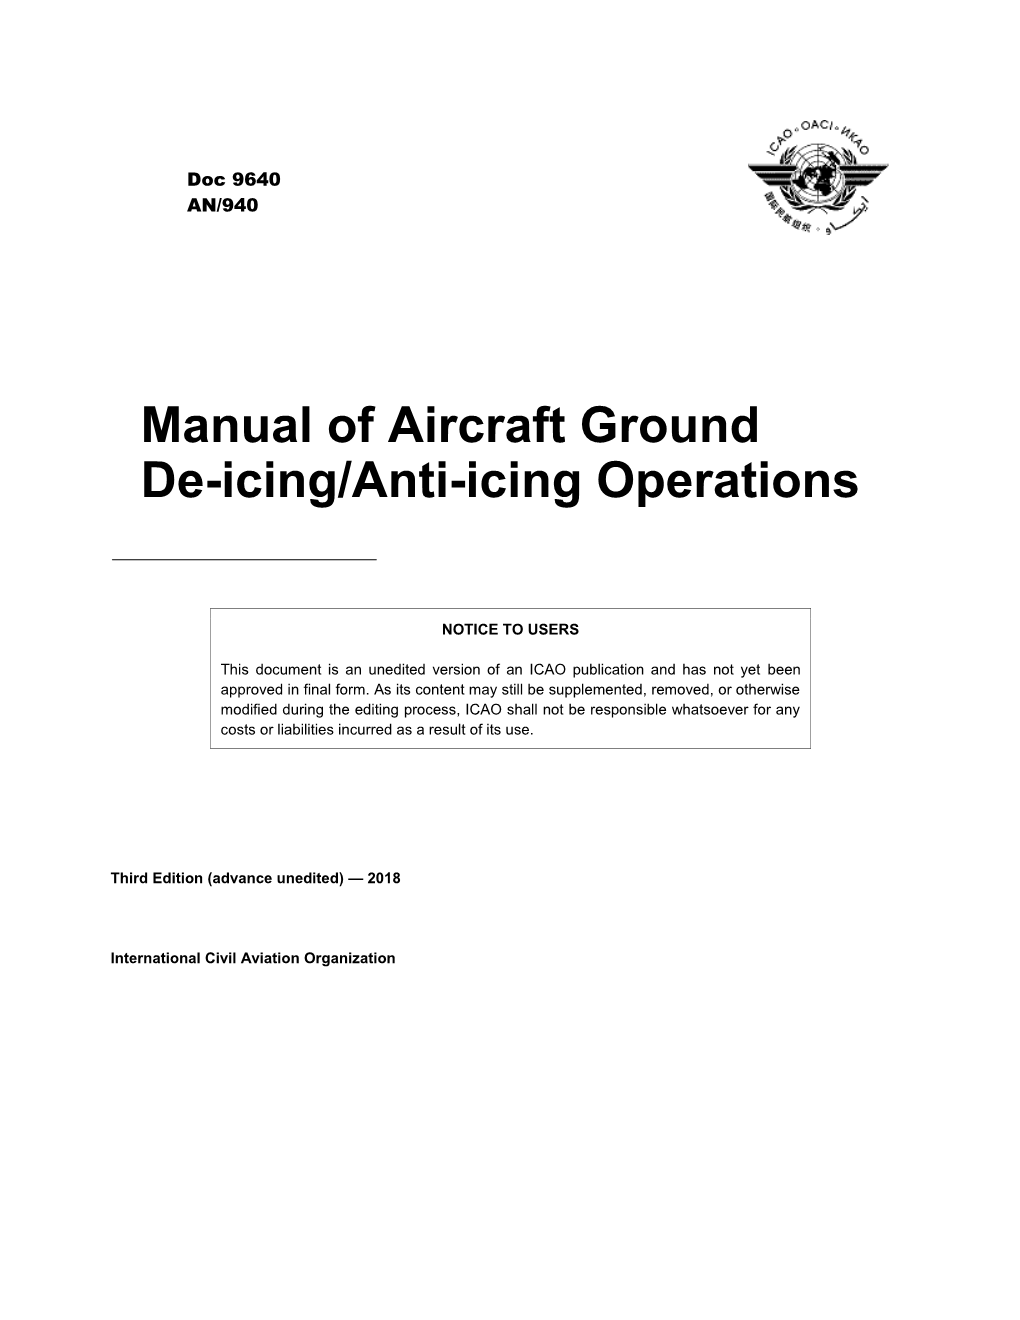 Manual of Aircraft Ground De-Icing/Anti-Icing Operations